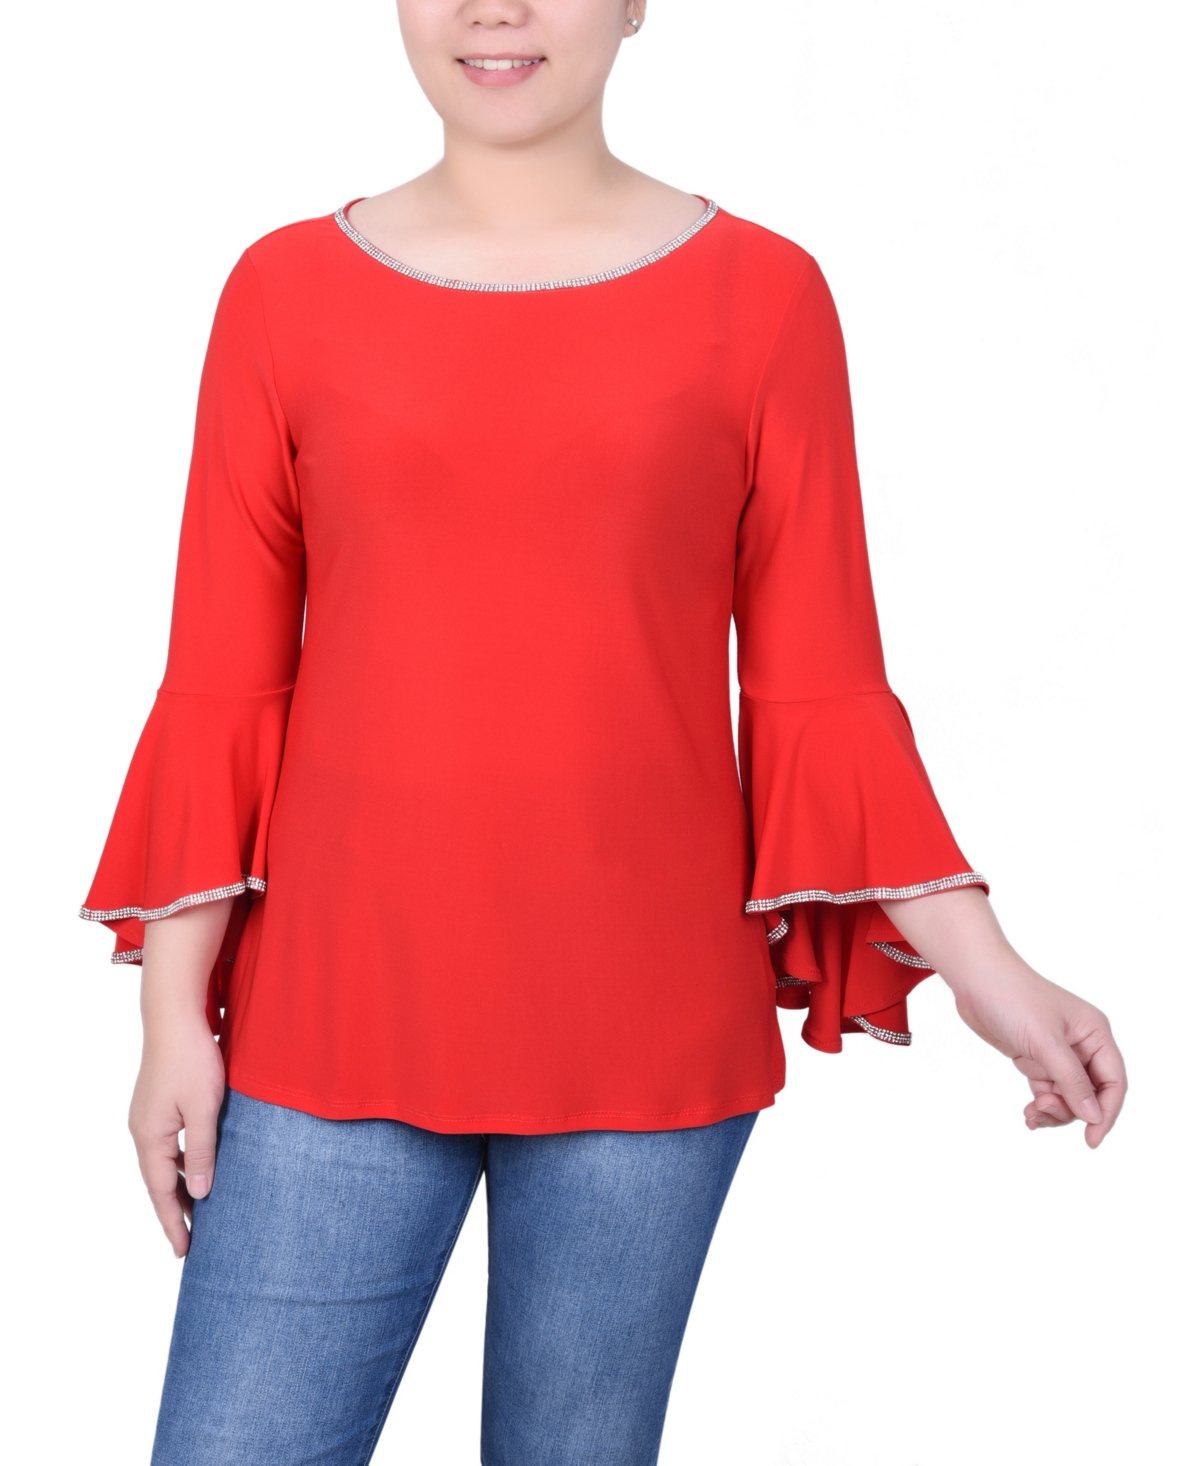 Petite Long Bell Sleeve Knit Top with Stone Details - Jester Red